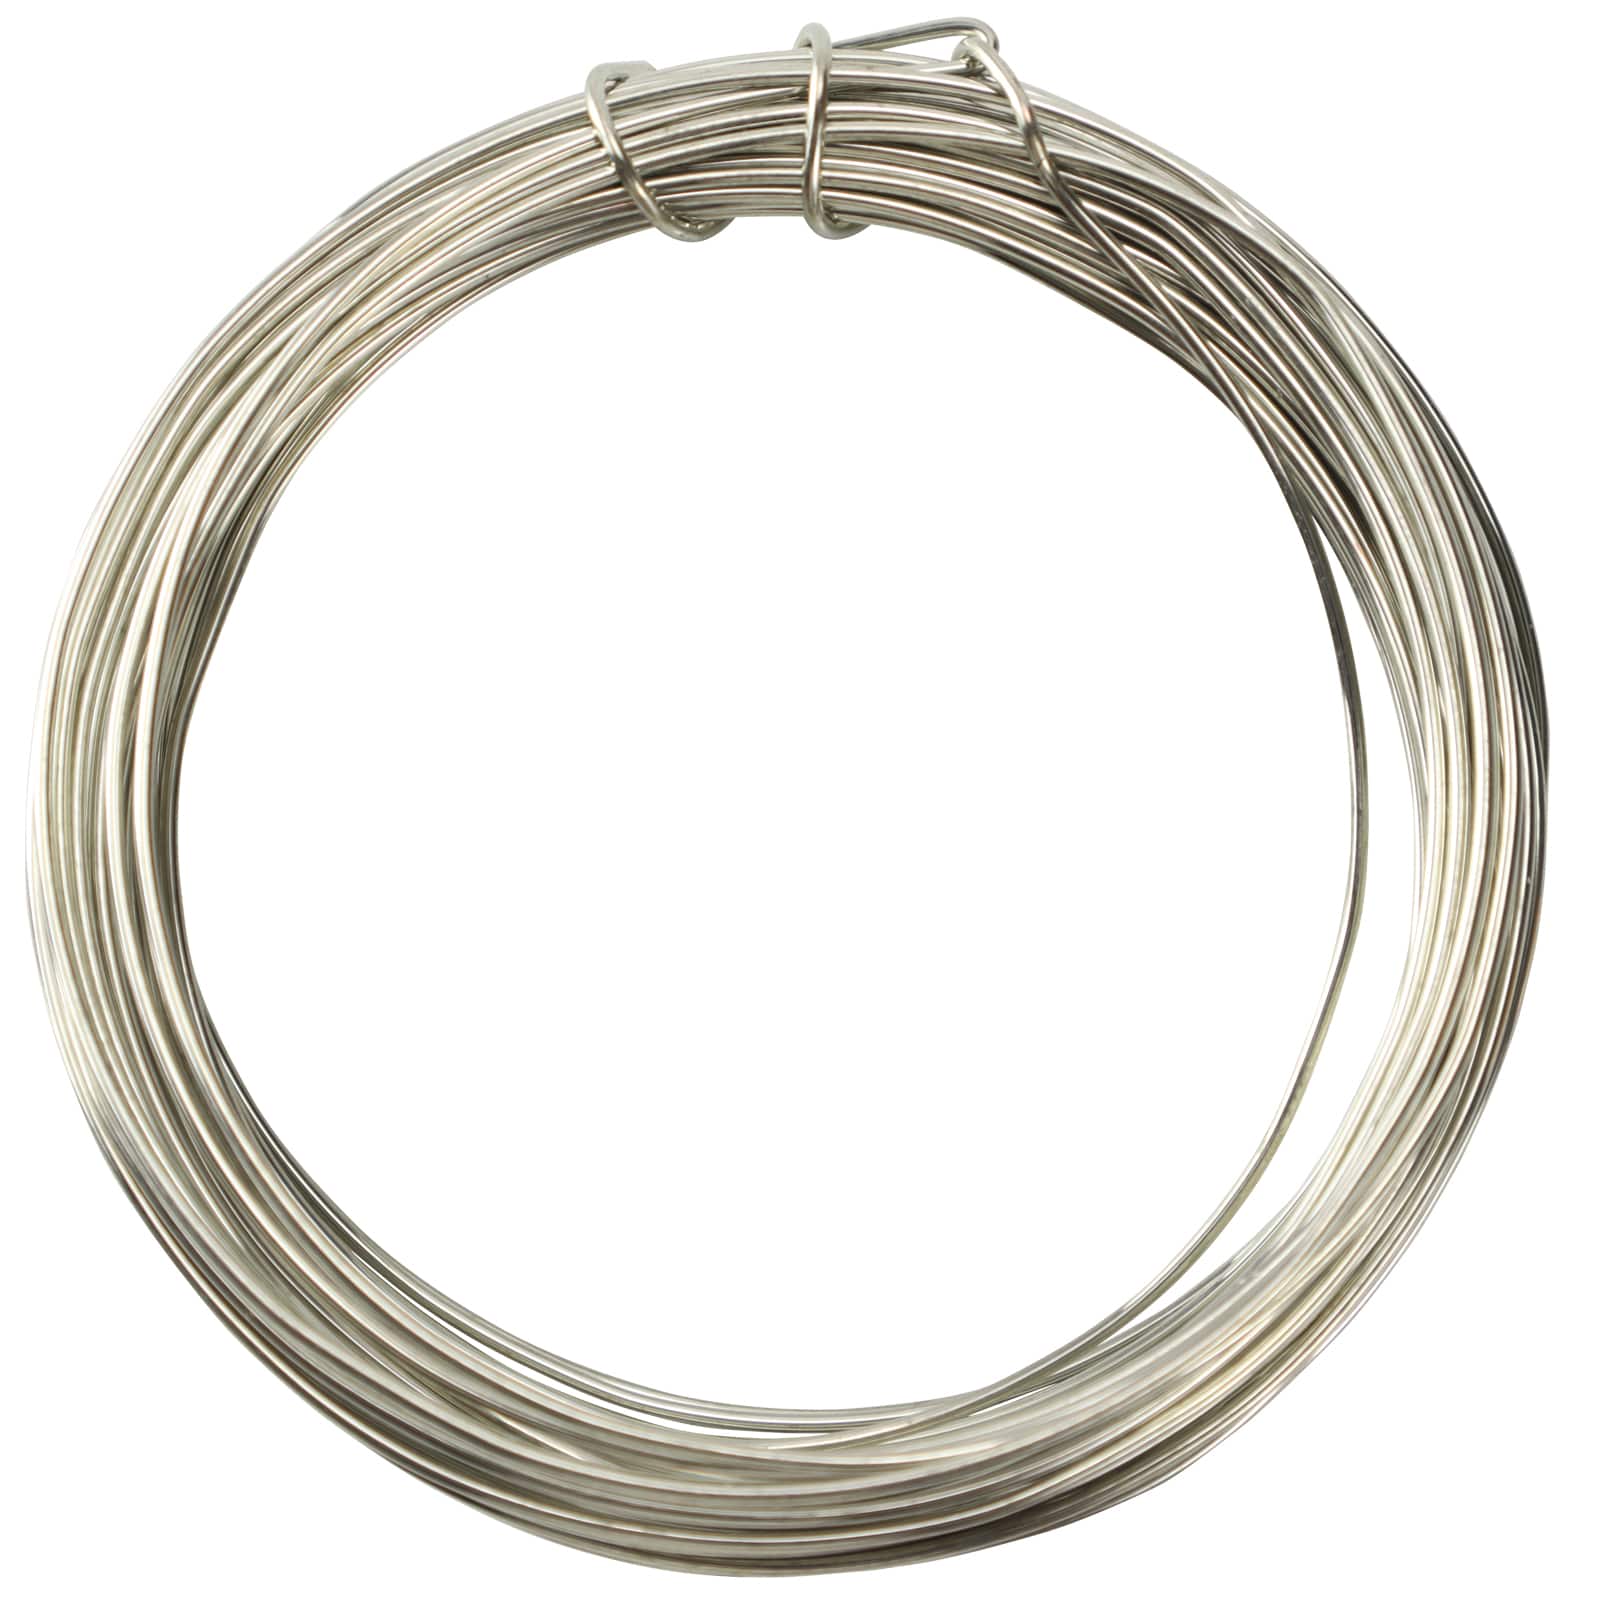 20 22 24 28Gauge Stainless Steel Wire for Jewelry Making DIY Crafts Project  Jewelry Finding Supplies